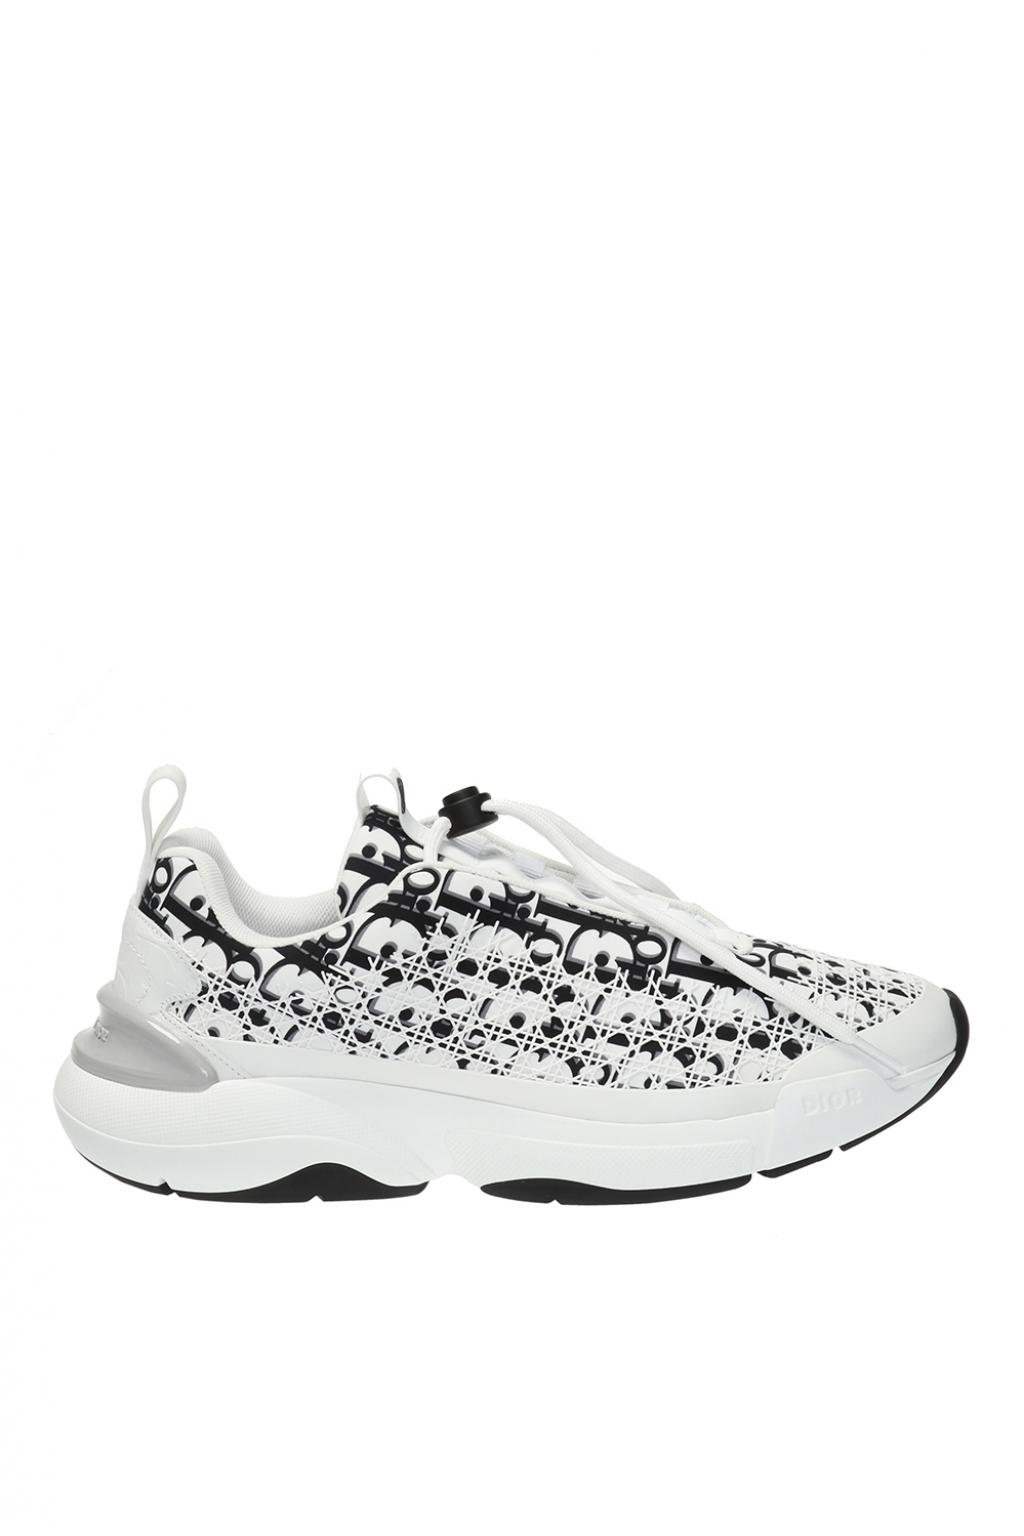 dior running shoes